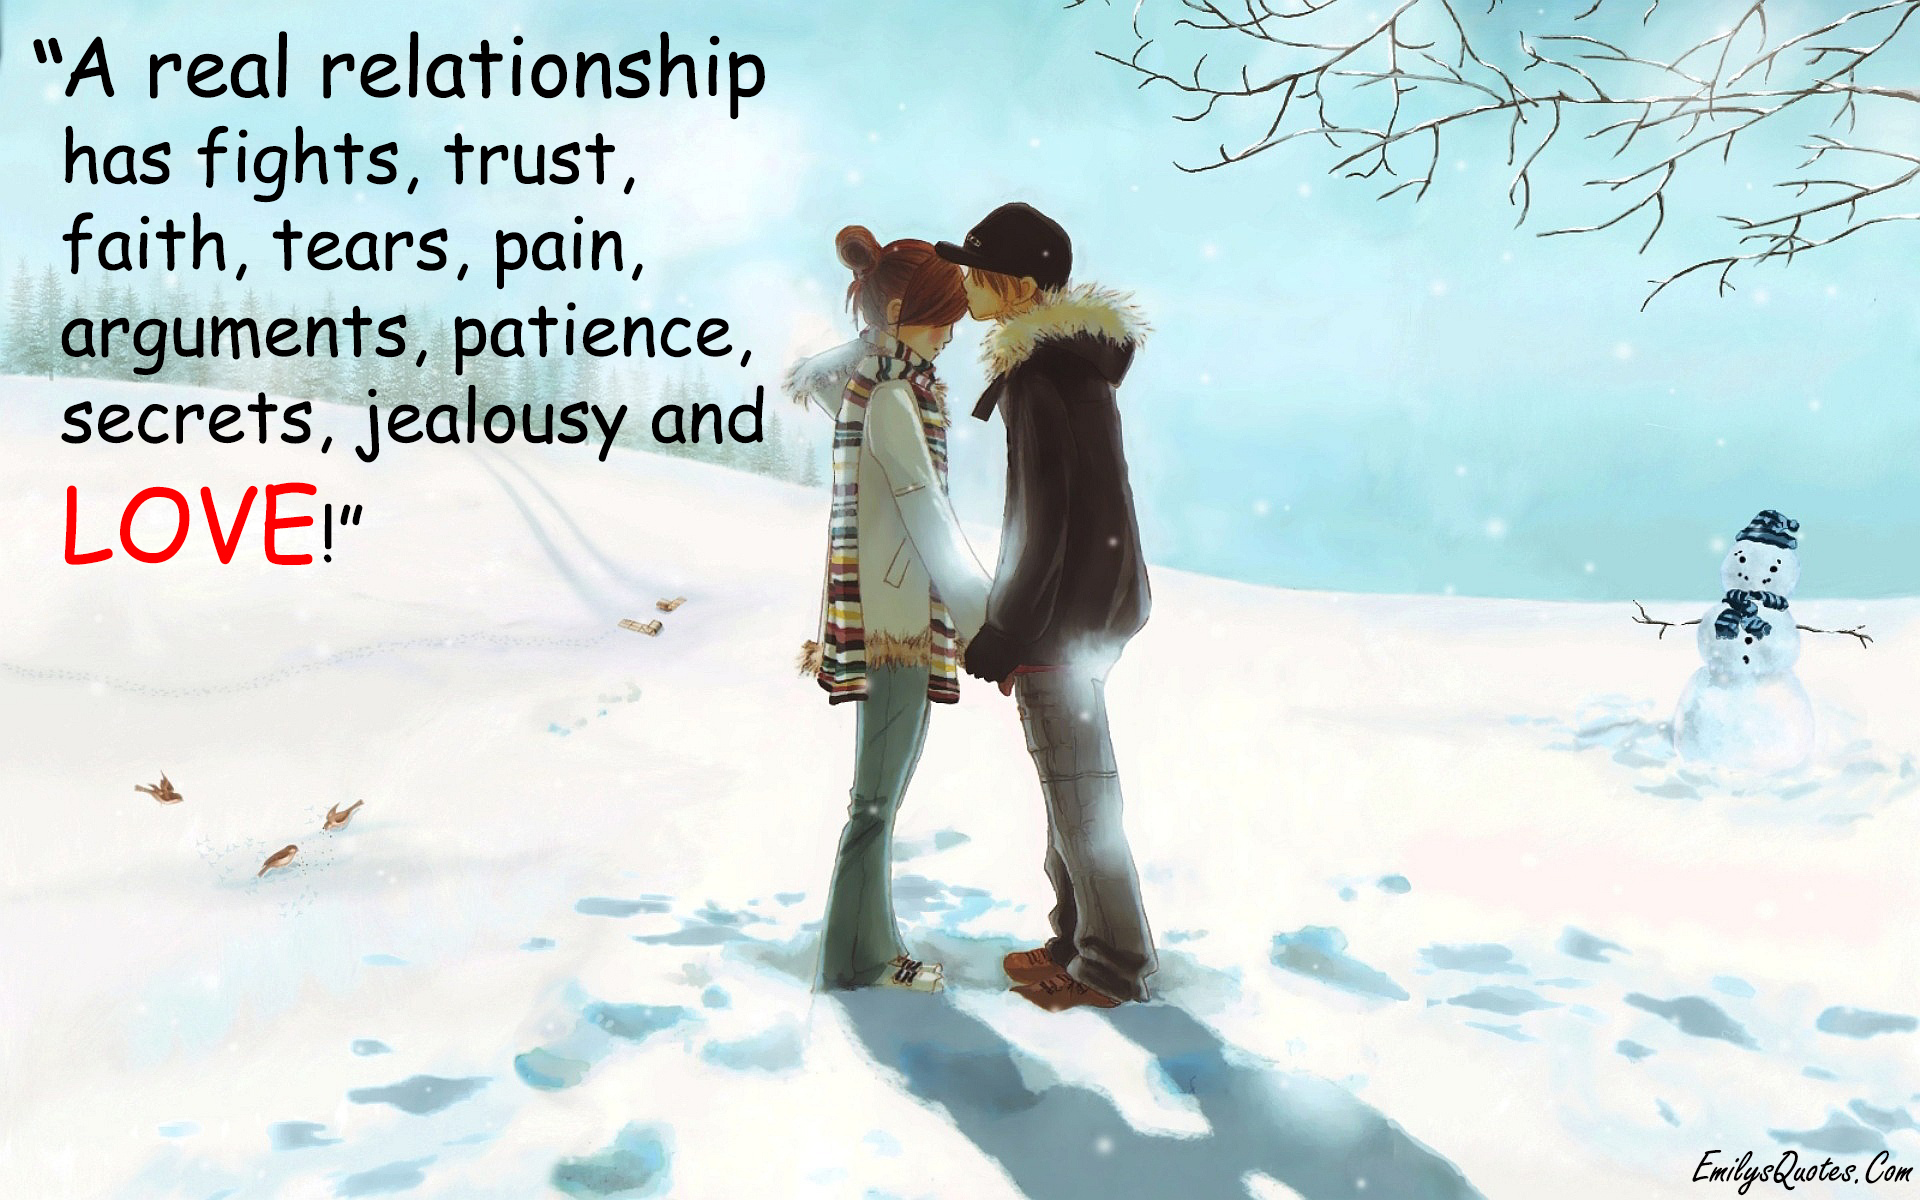 A real relationship has fights, trust, faith, tears, pain, arguments